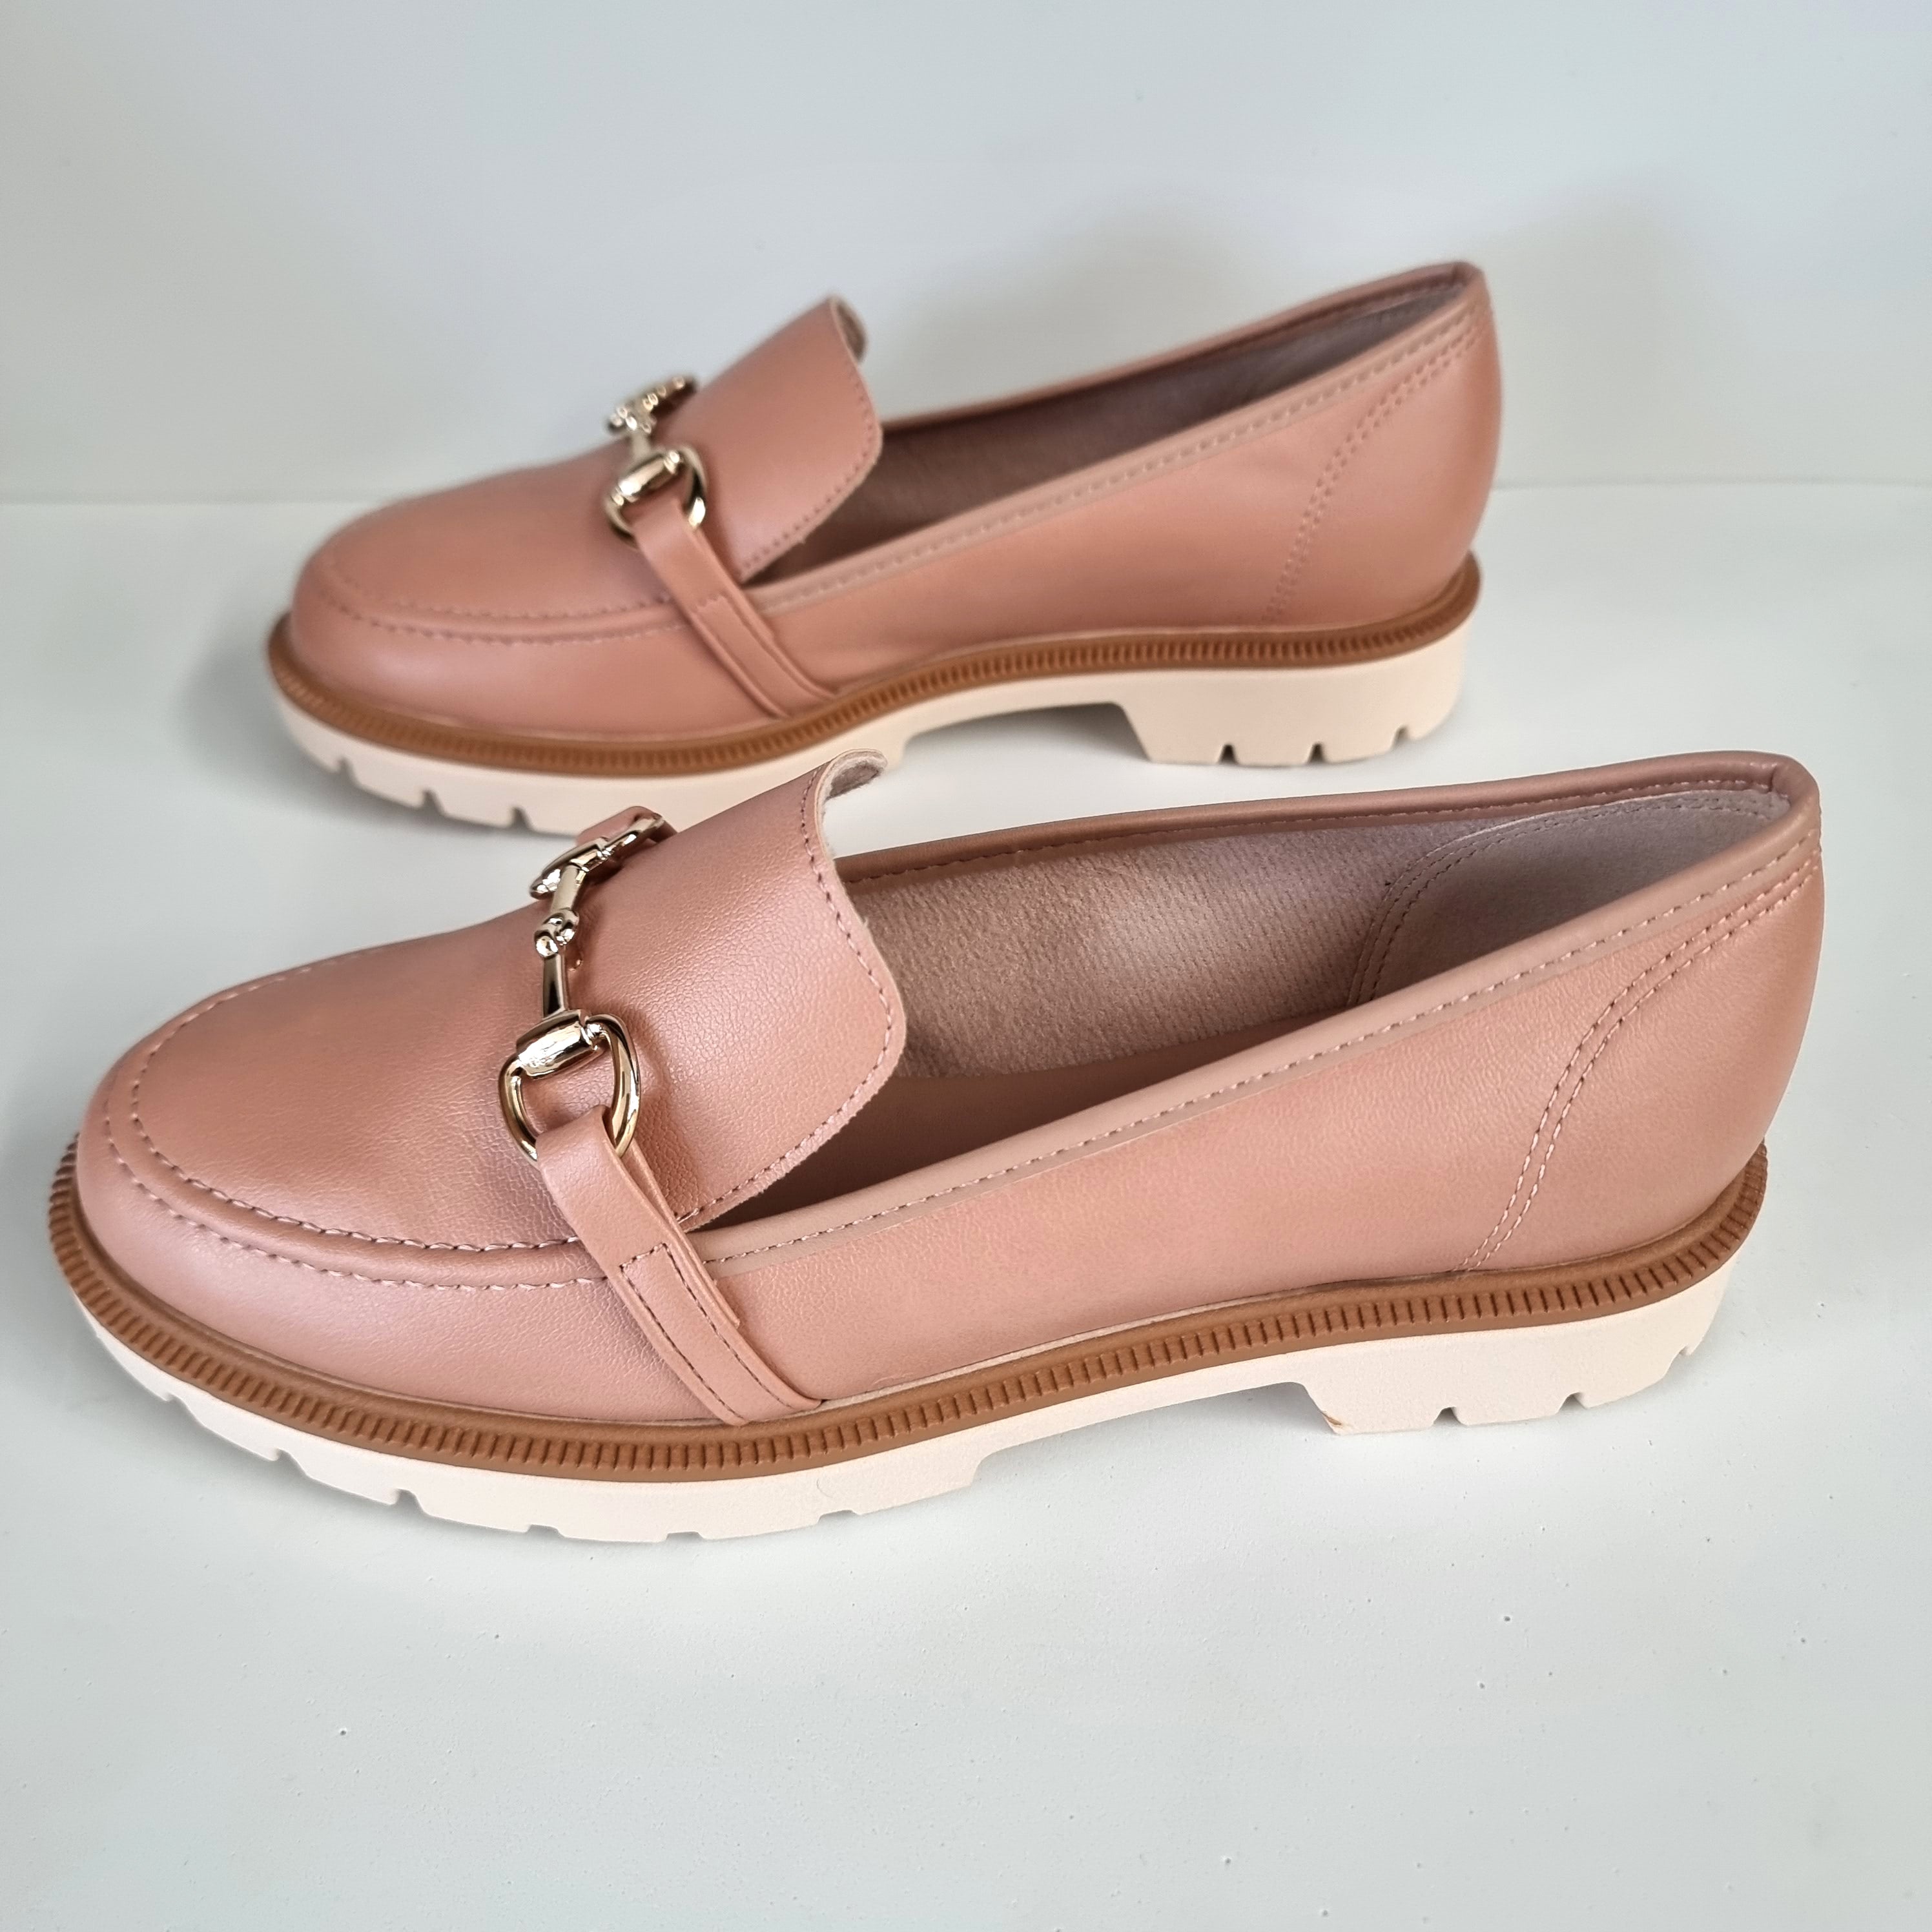 Beira Rio 4283-204 Flat Loafer in Nude